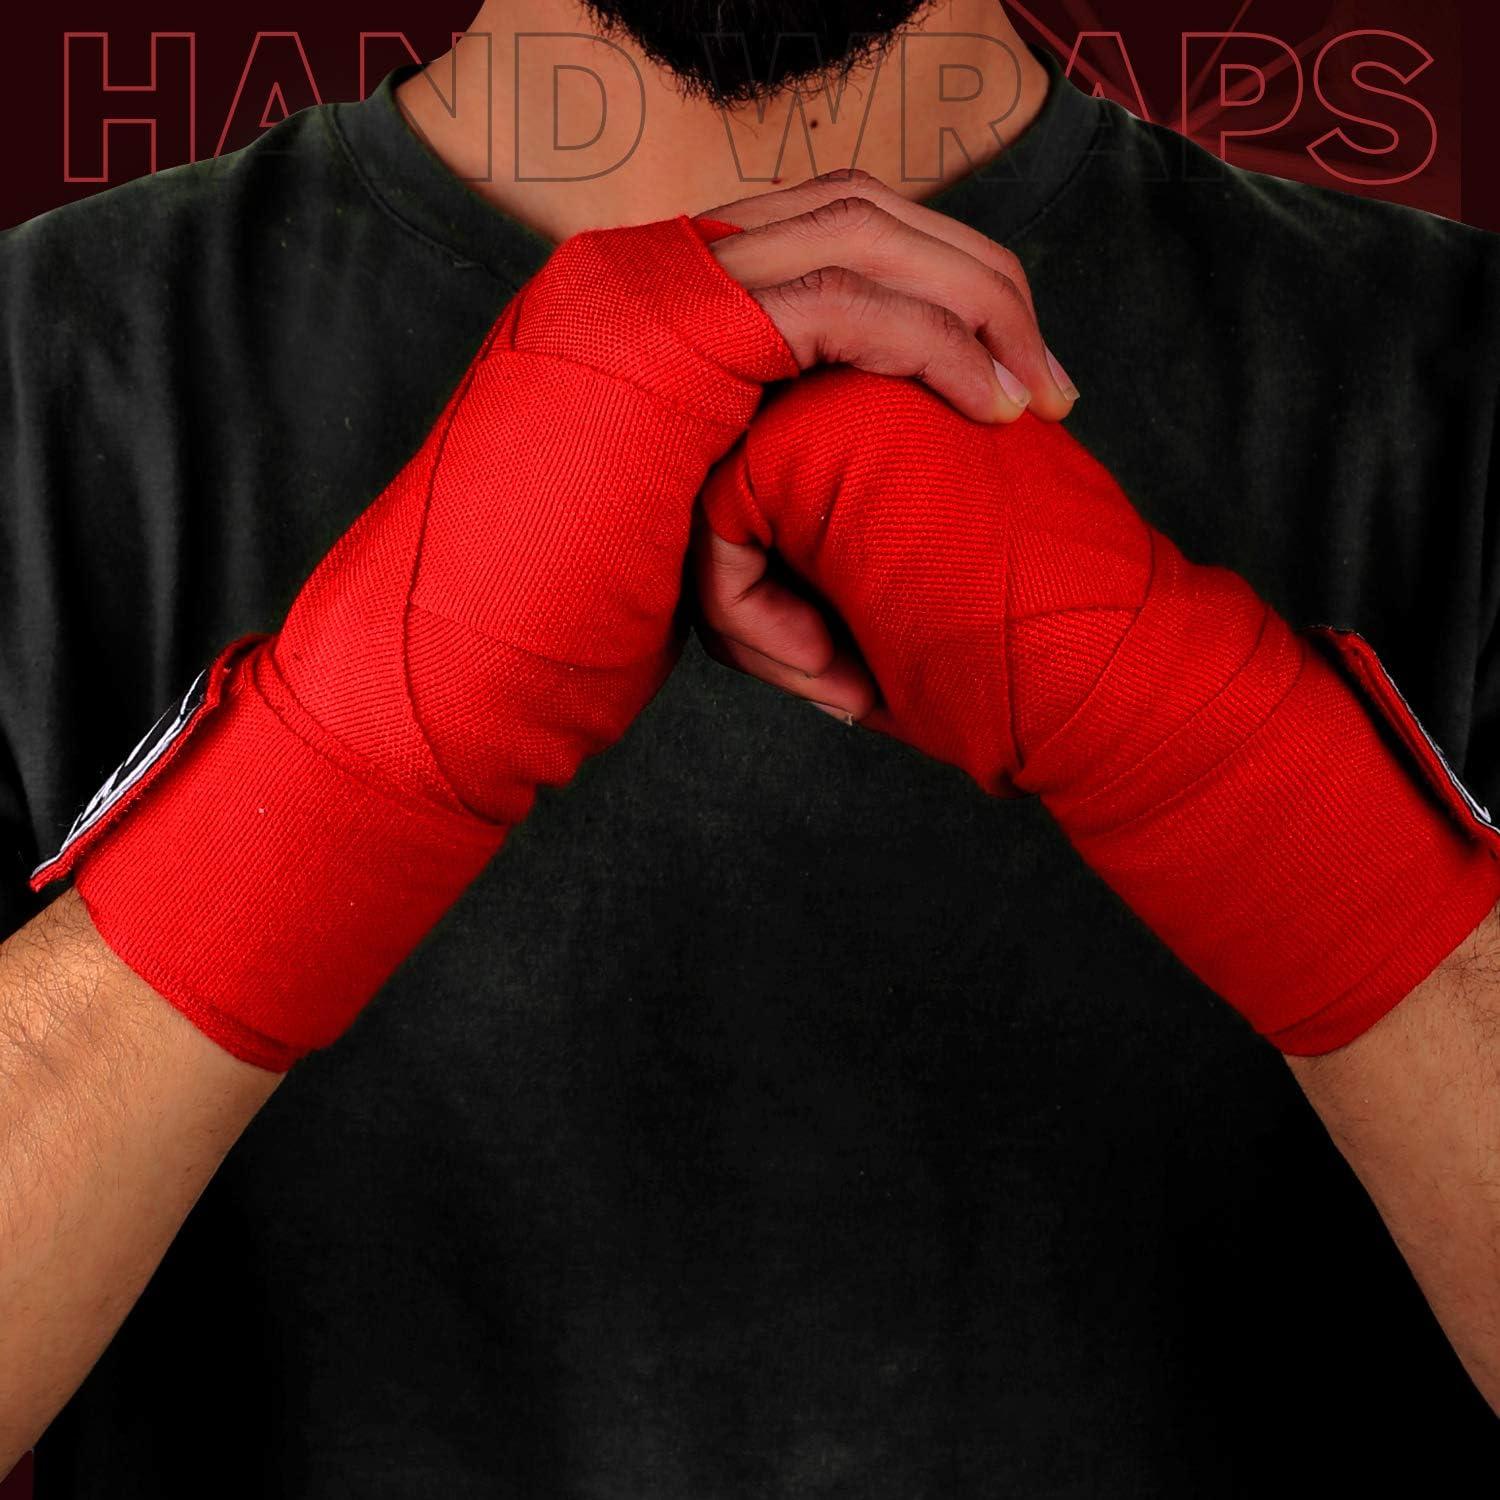 Boxing Hand Wraps 180 inch Bandages for Martial Arts Kickboxing Muay Thai  MMA Training Sparring Inner Gloves for Men Women Mitts Protector with Thumb